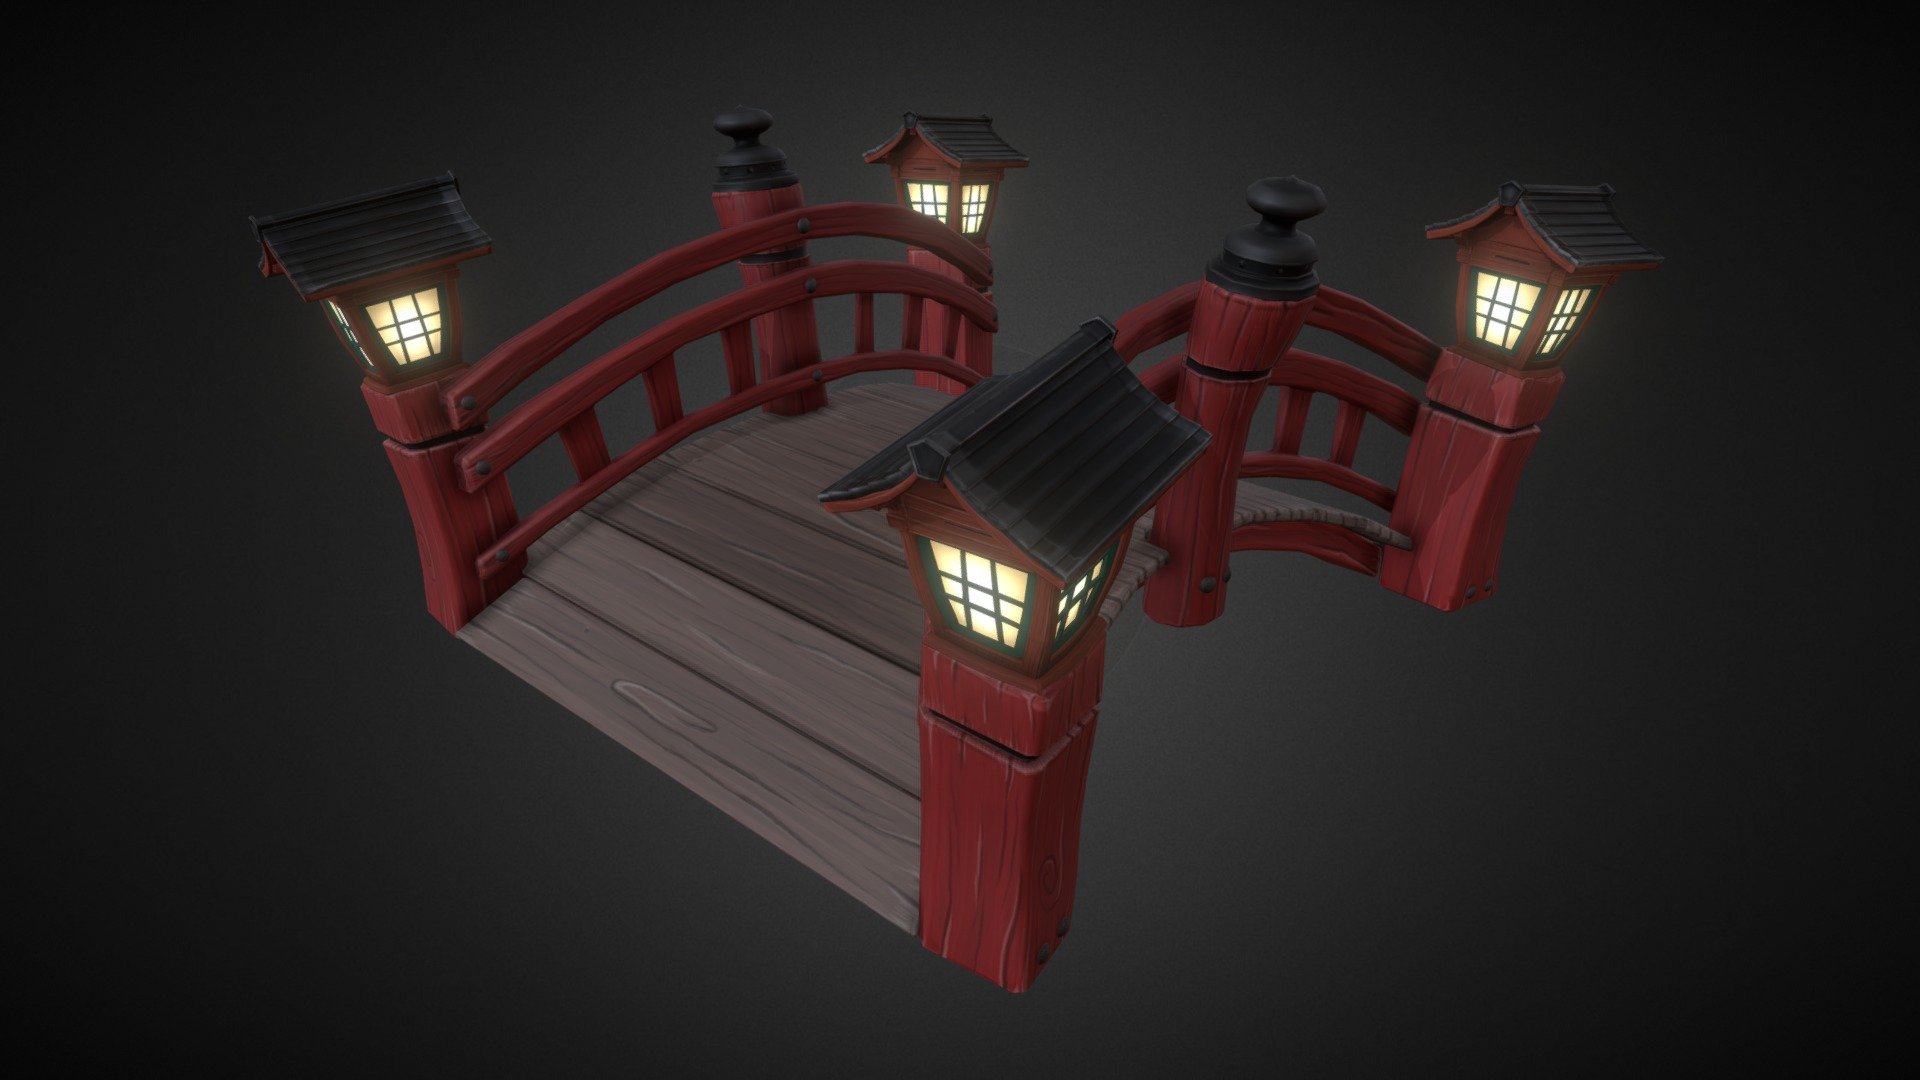 A simple game asset created for my certificate 3 course 3d model